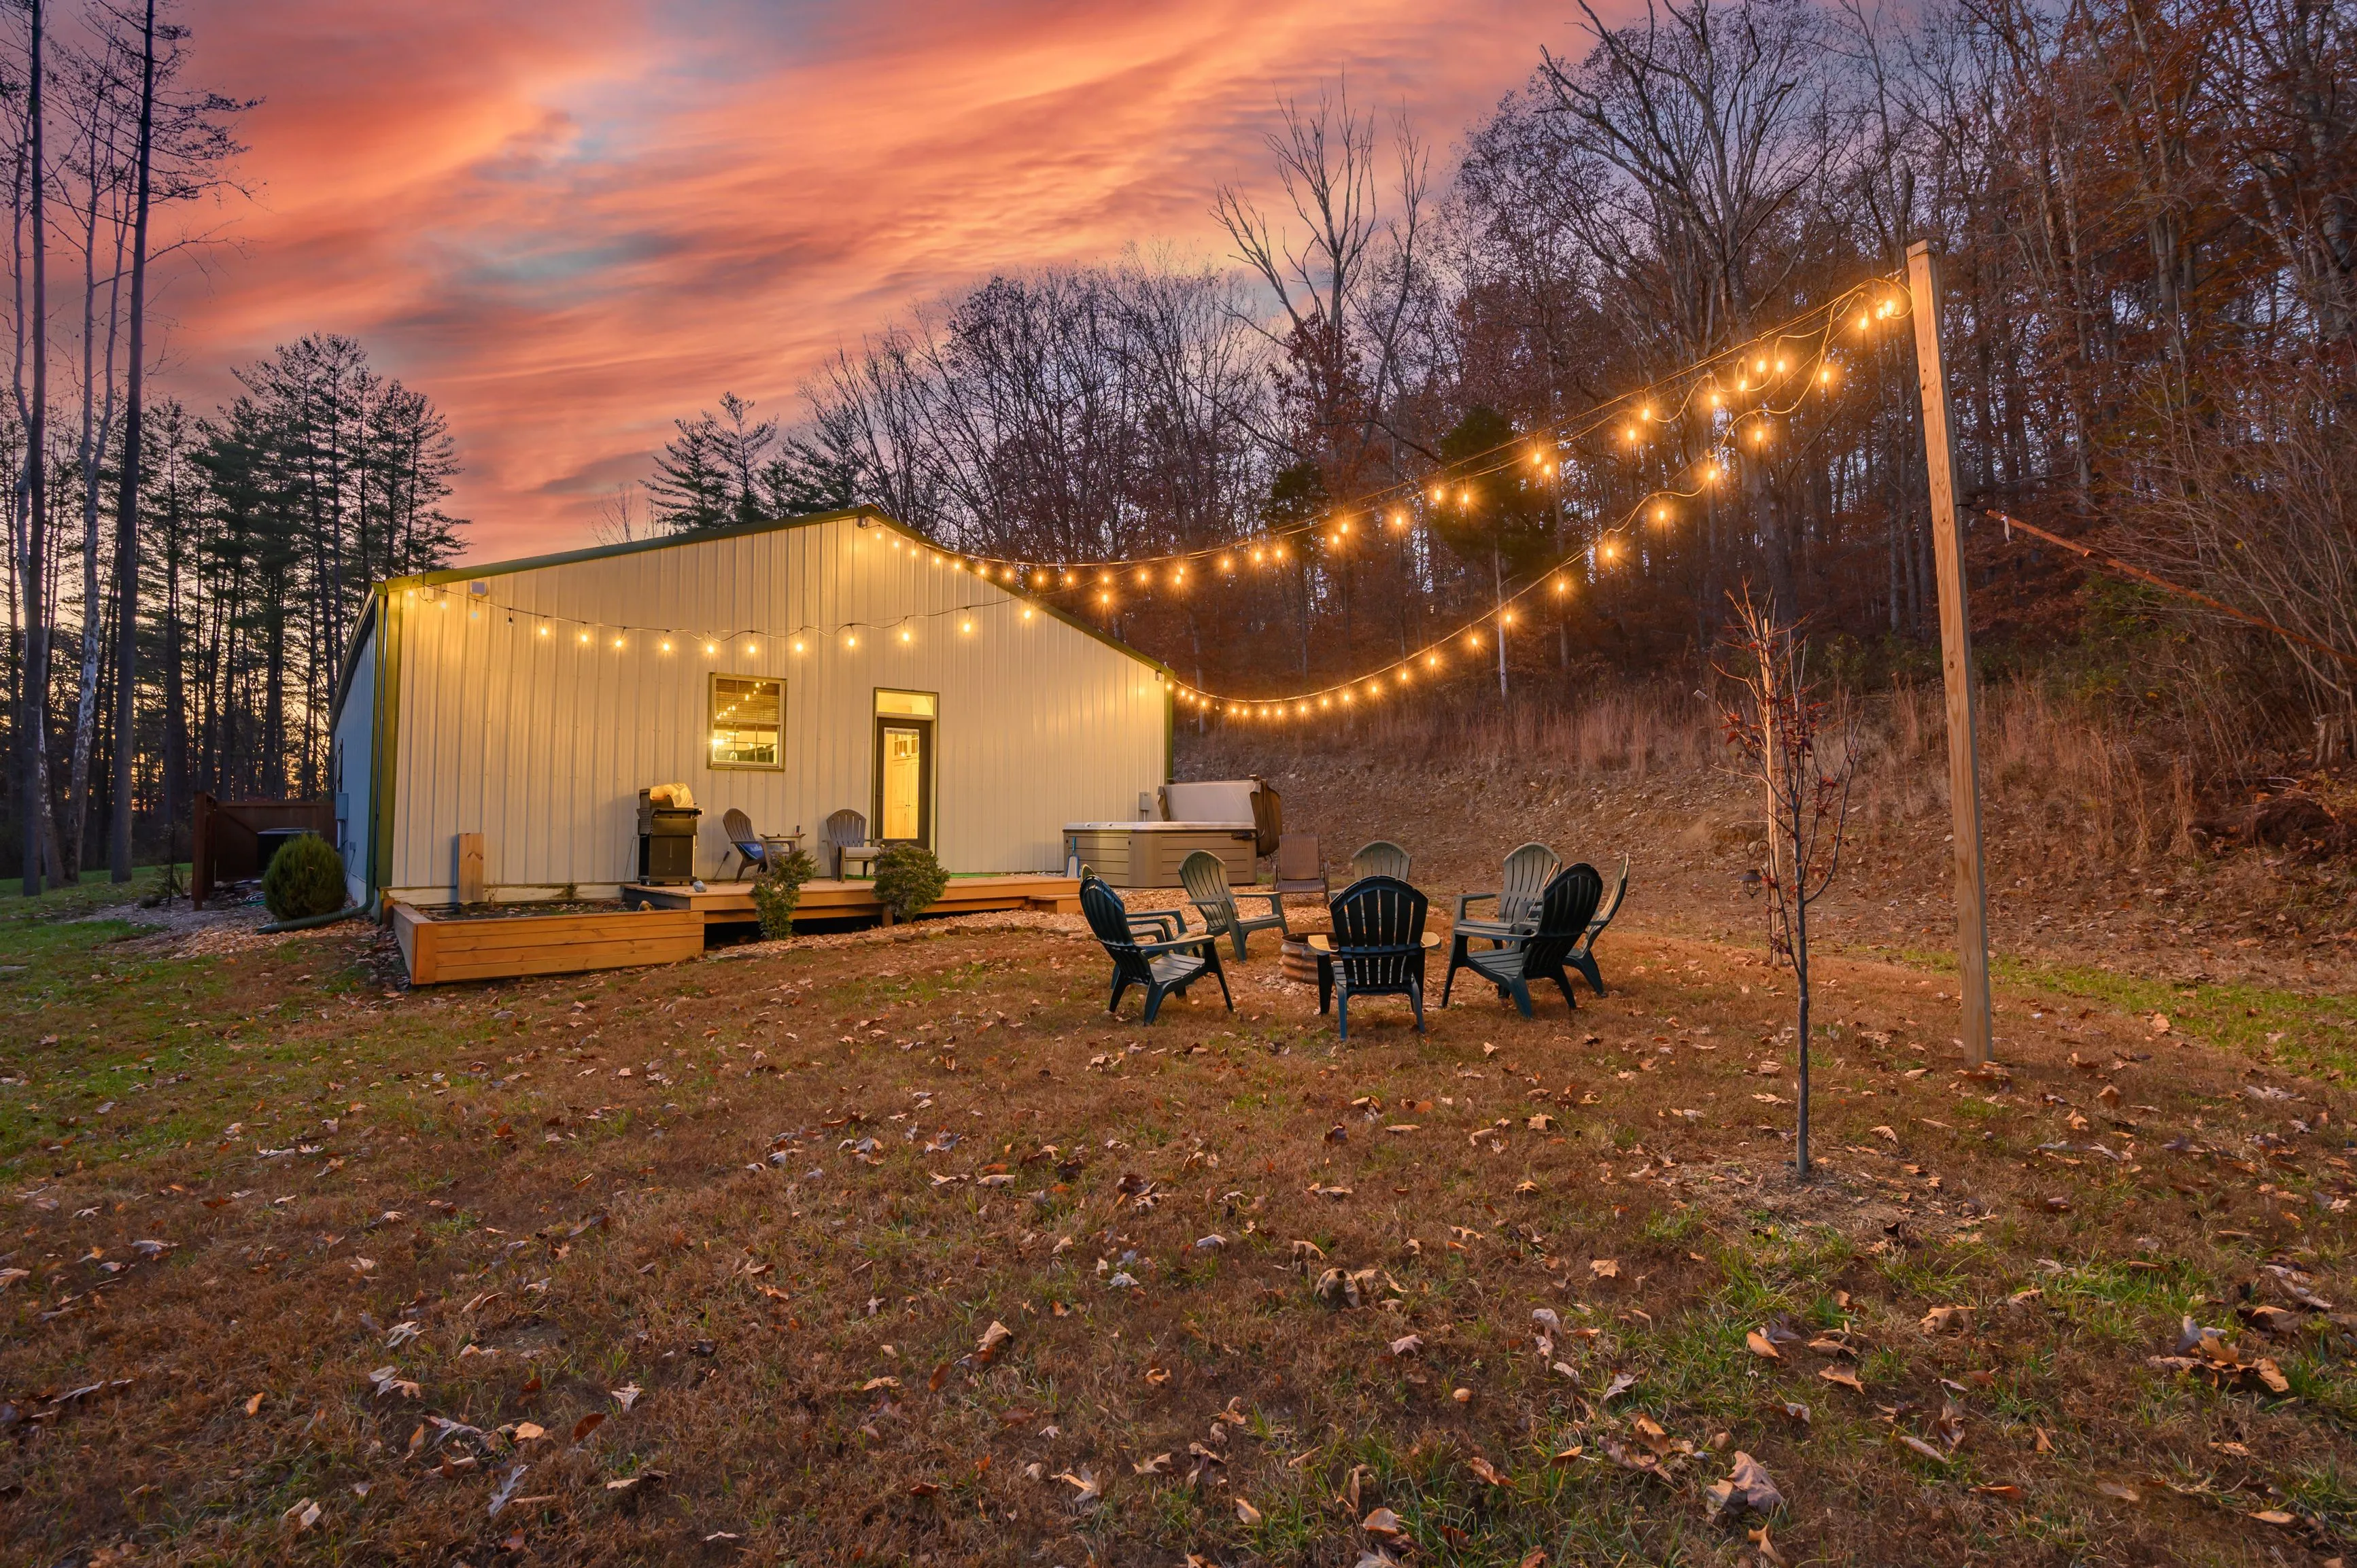 A cozy outdoor seating area with string lights at twilight in front of a modern tiny house.